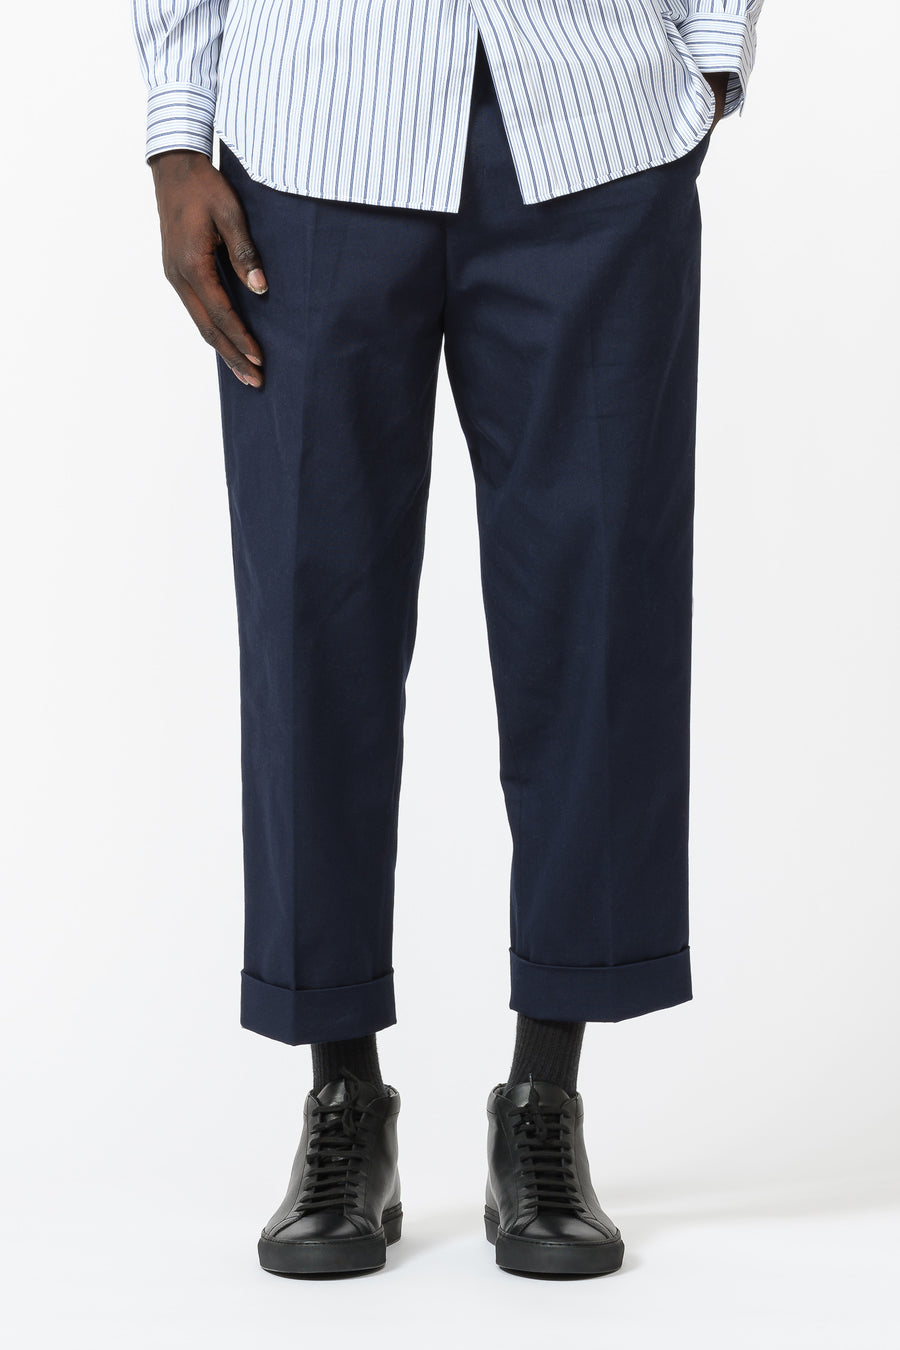 navy blue trousers mens